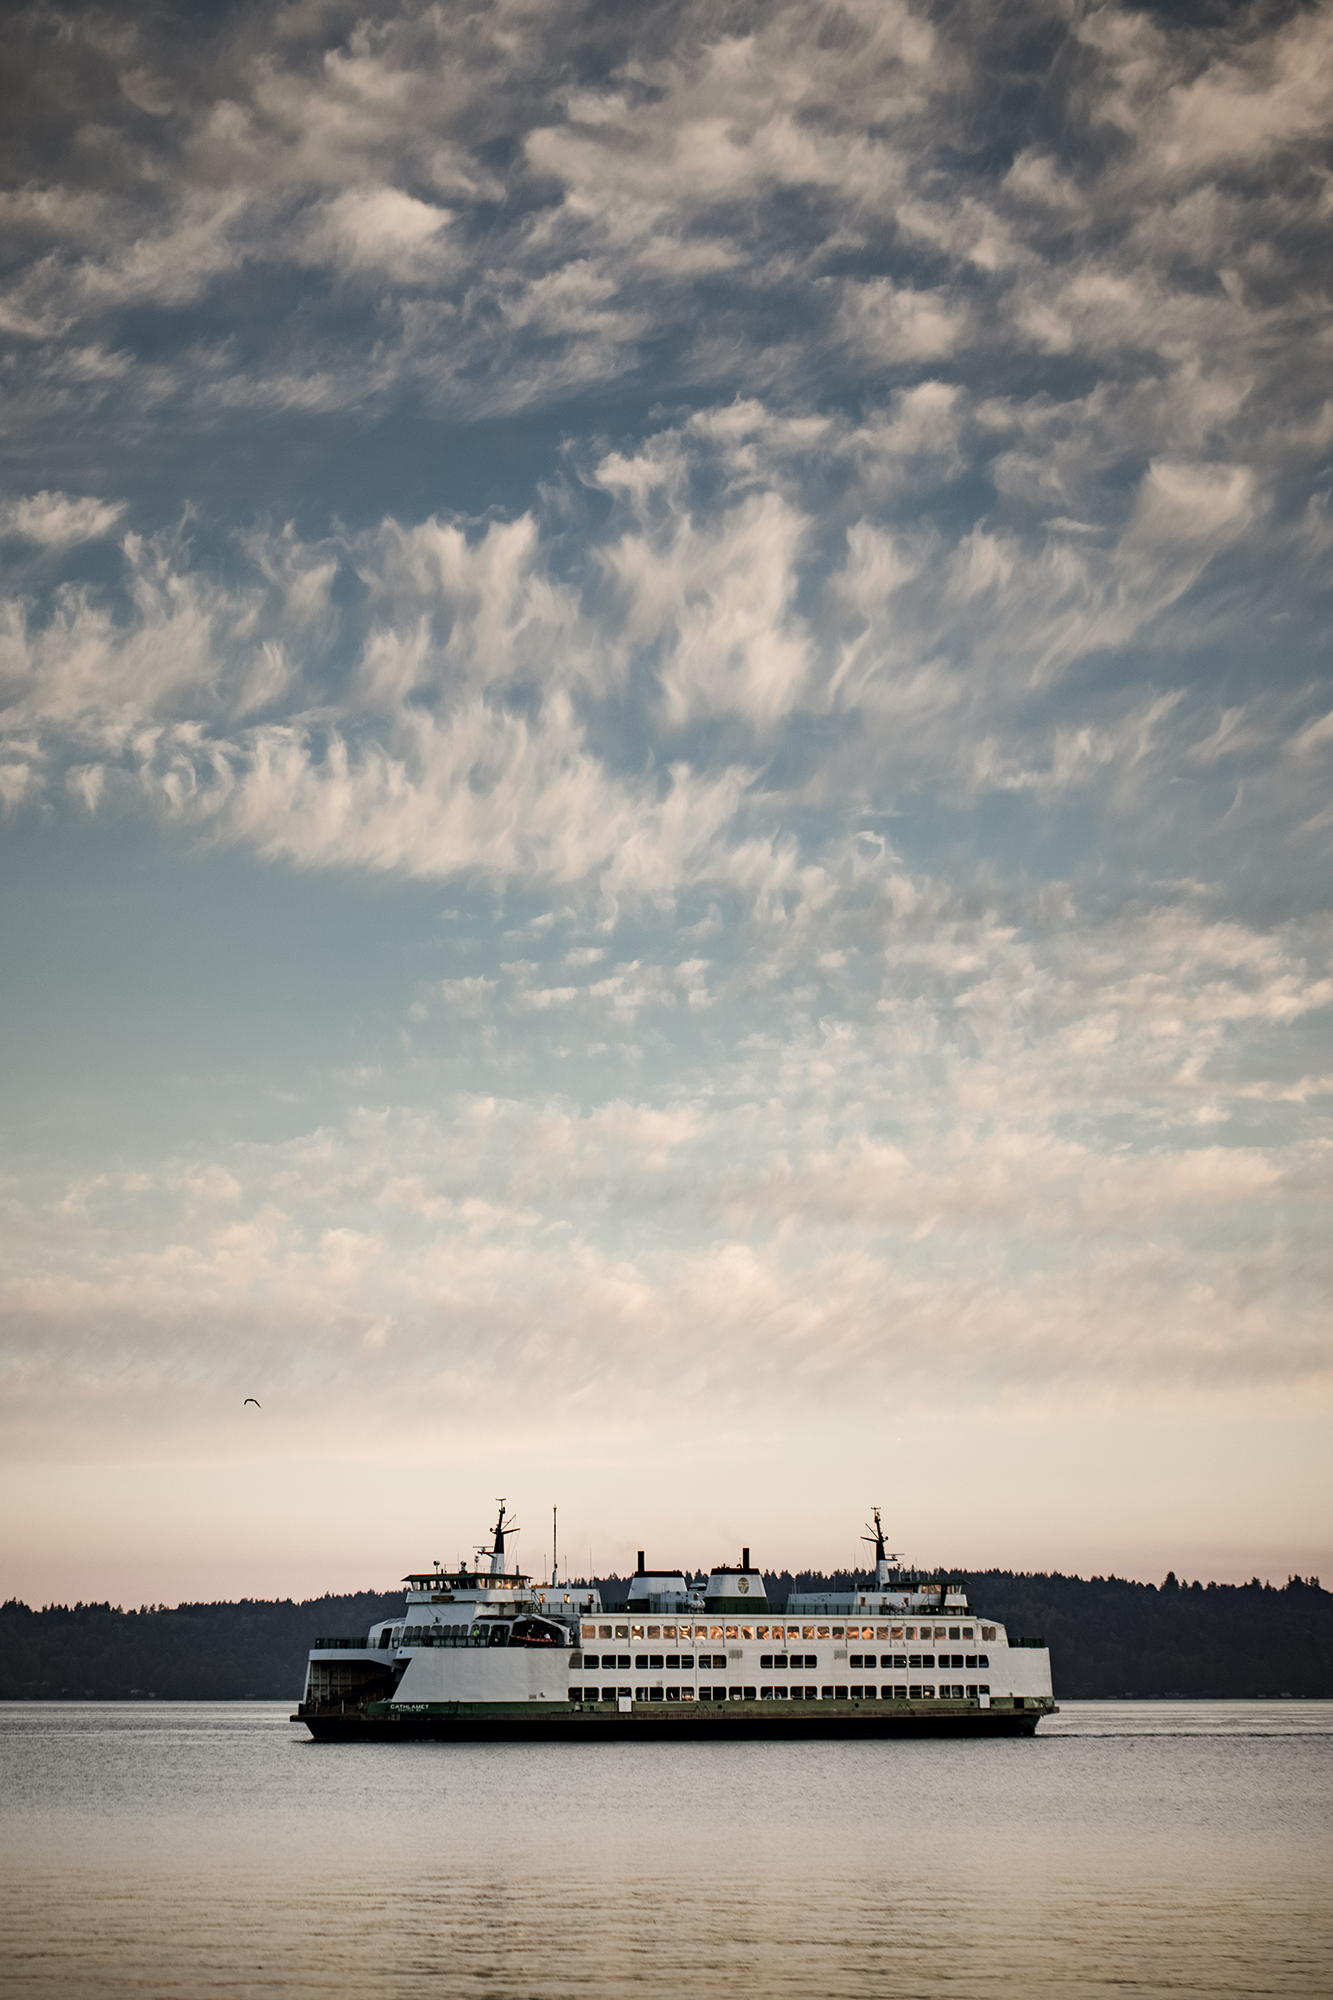 Large ferry on water in west seattle